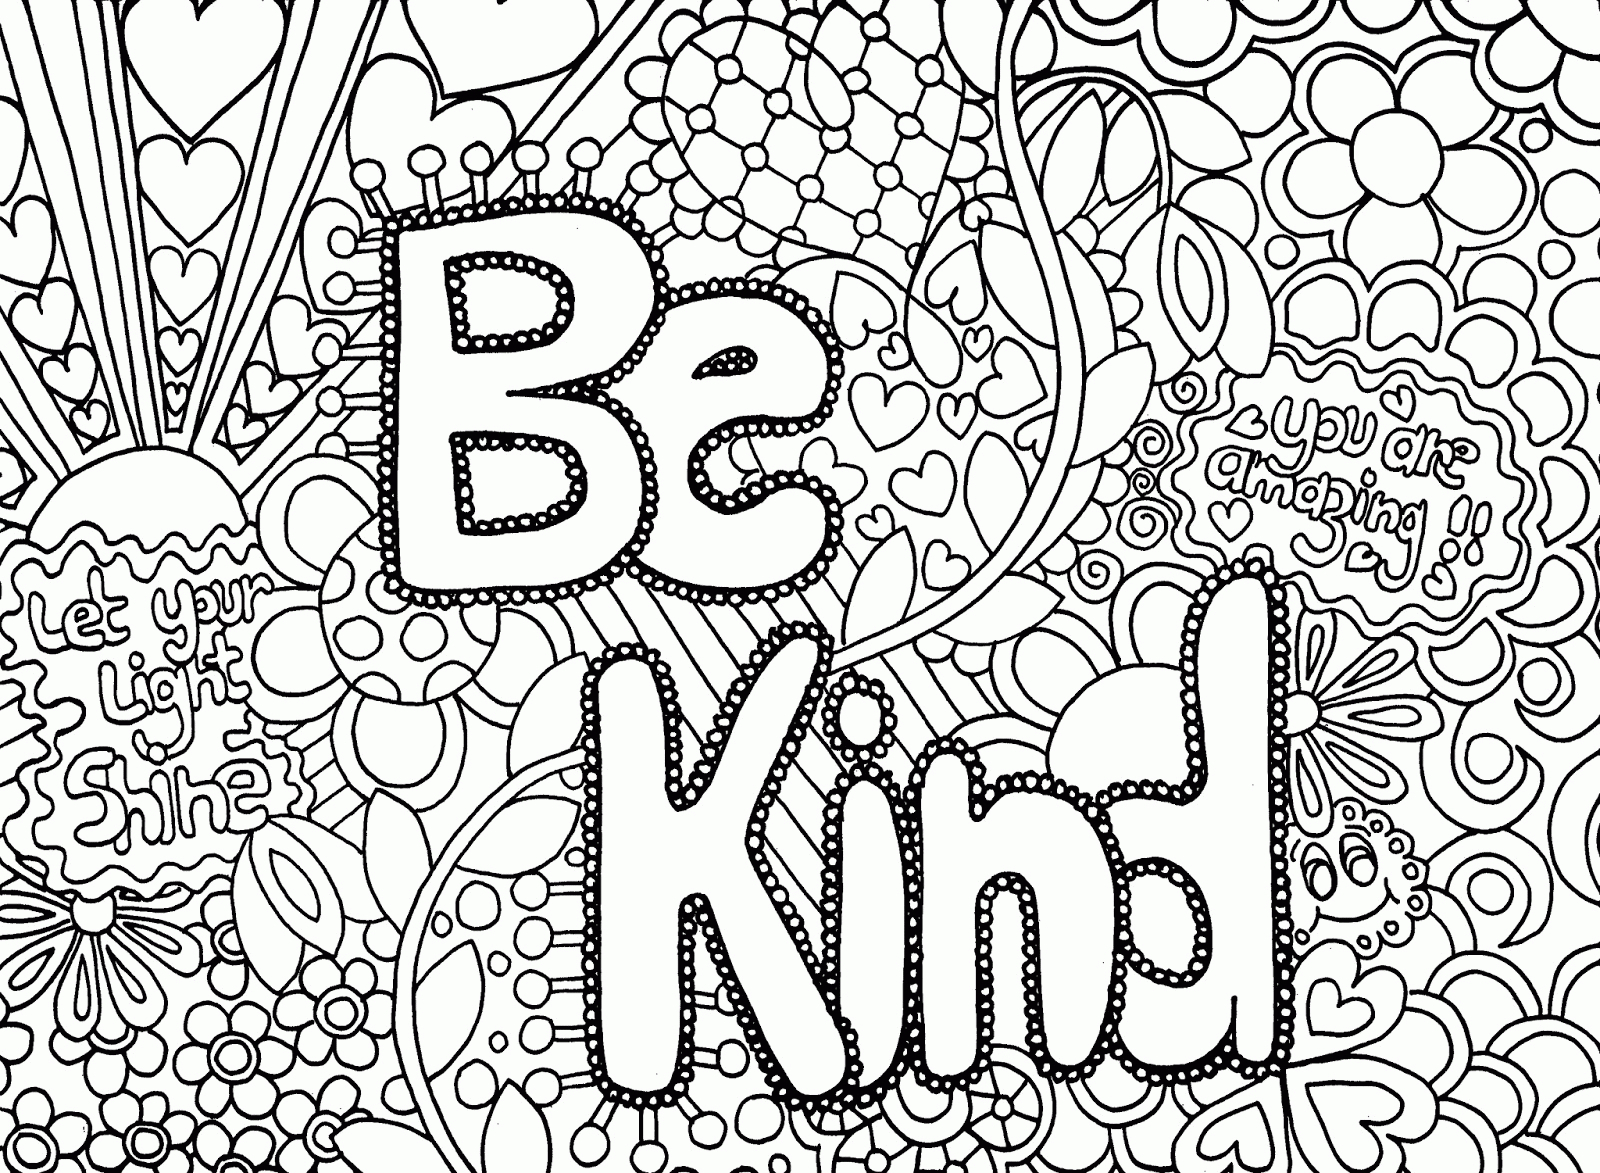 Teenage Coloring Pages Free Printable - Coloring Home - Free Printable Coloring Pages For Teens